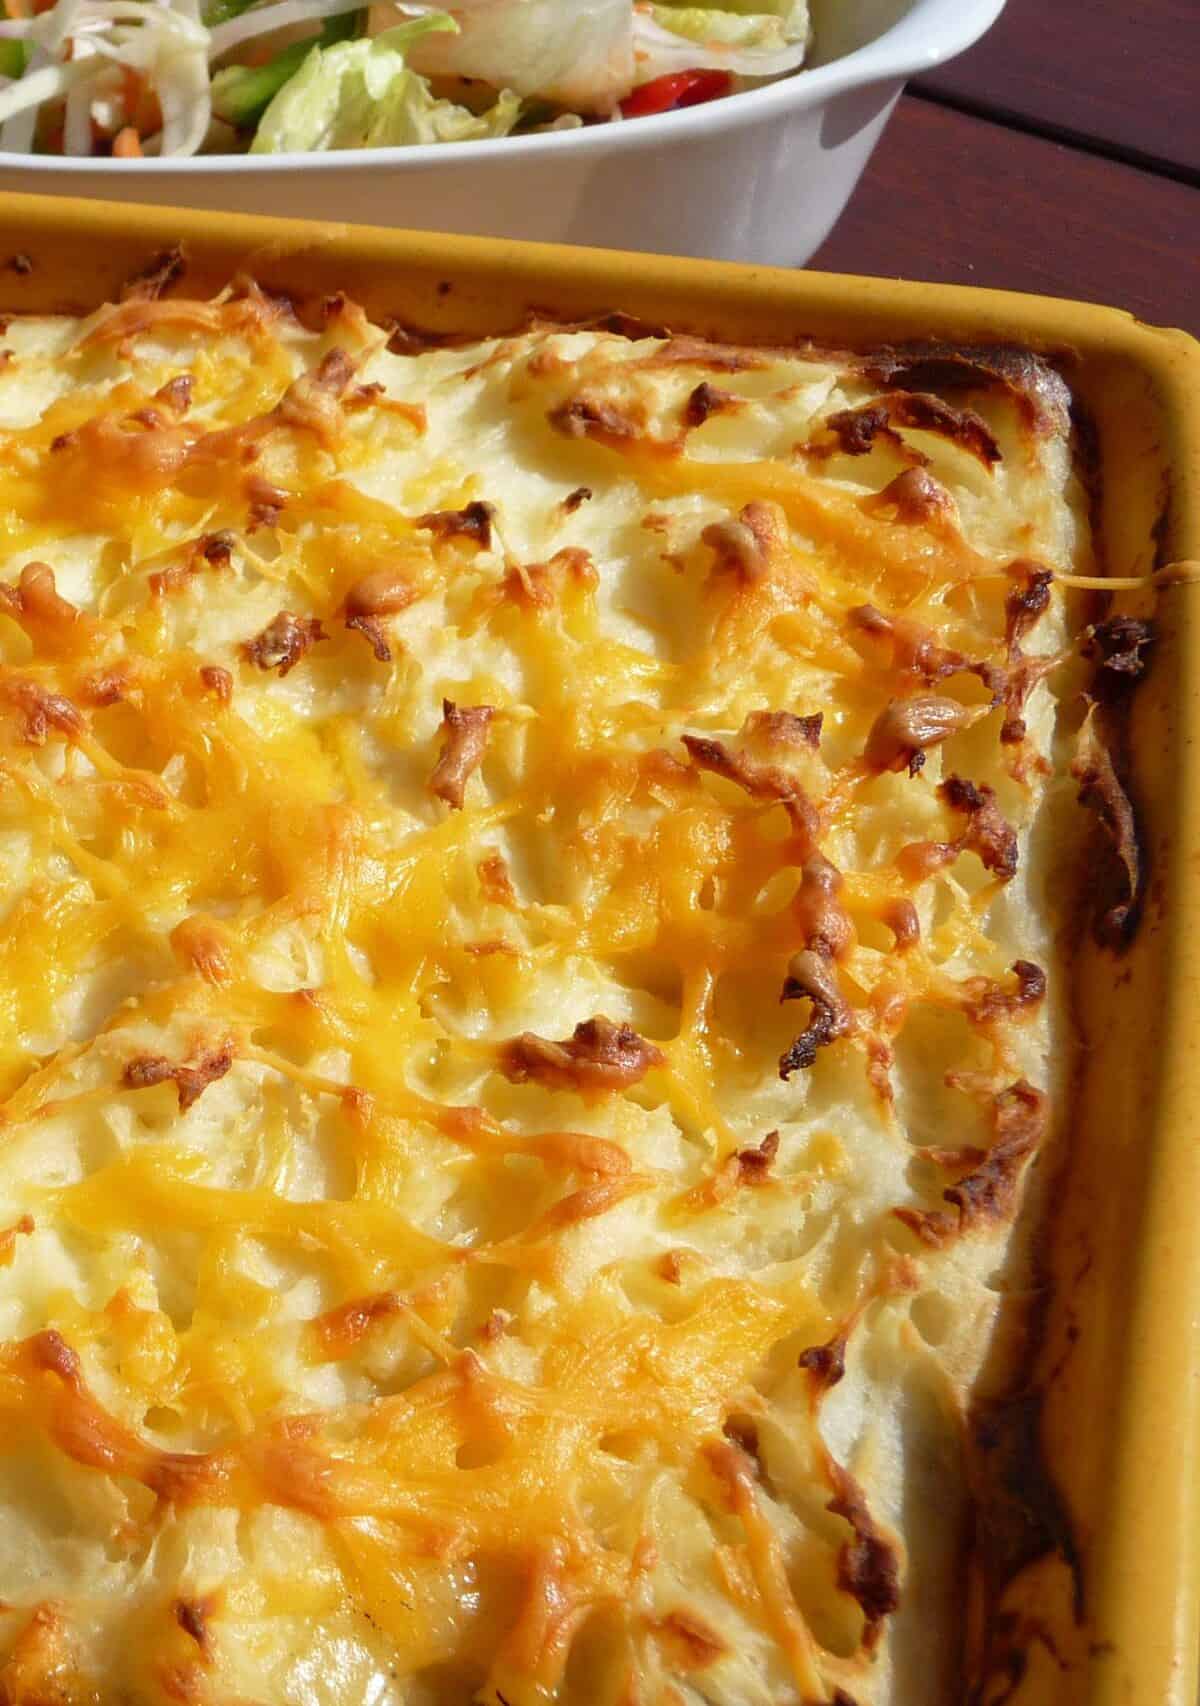  The ultimate comfort food: Gobble-Up Turkey Cottage Pie